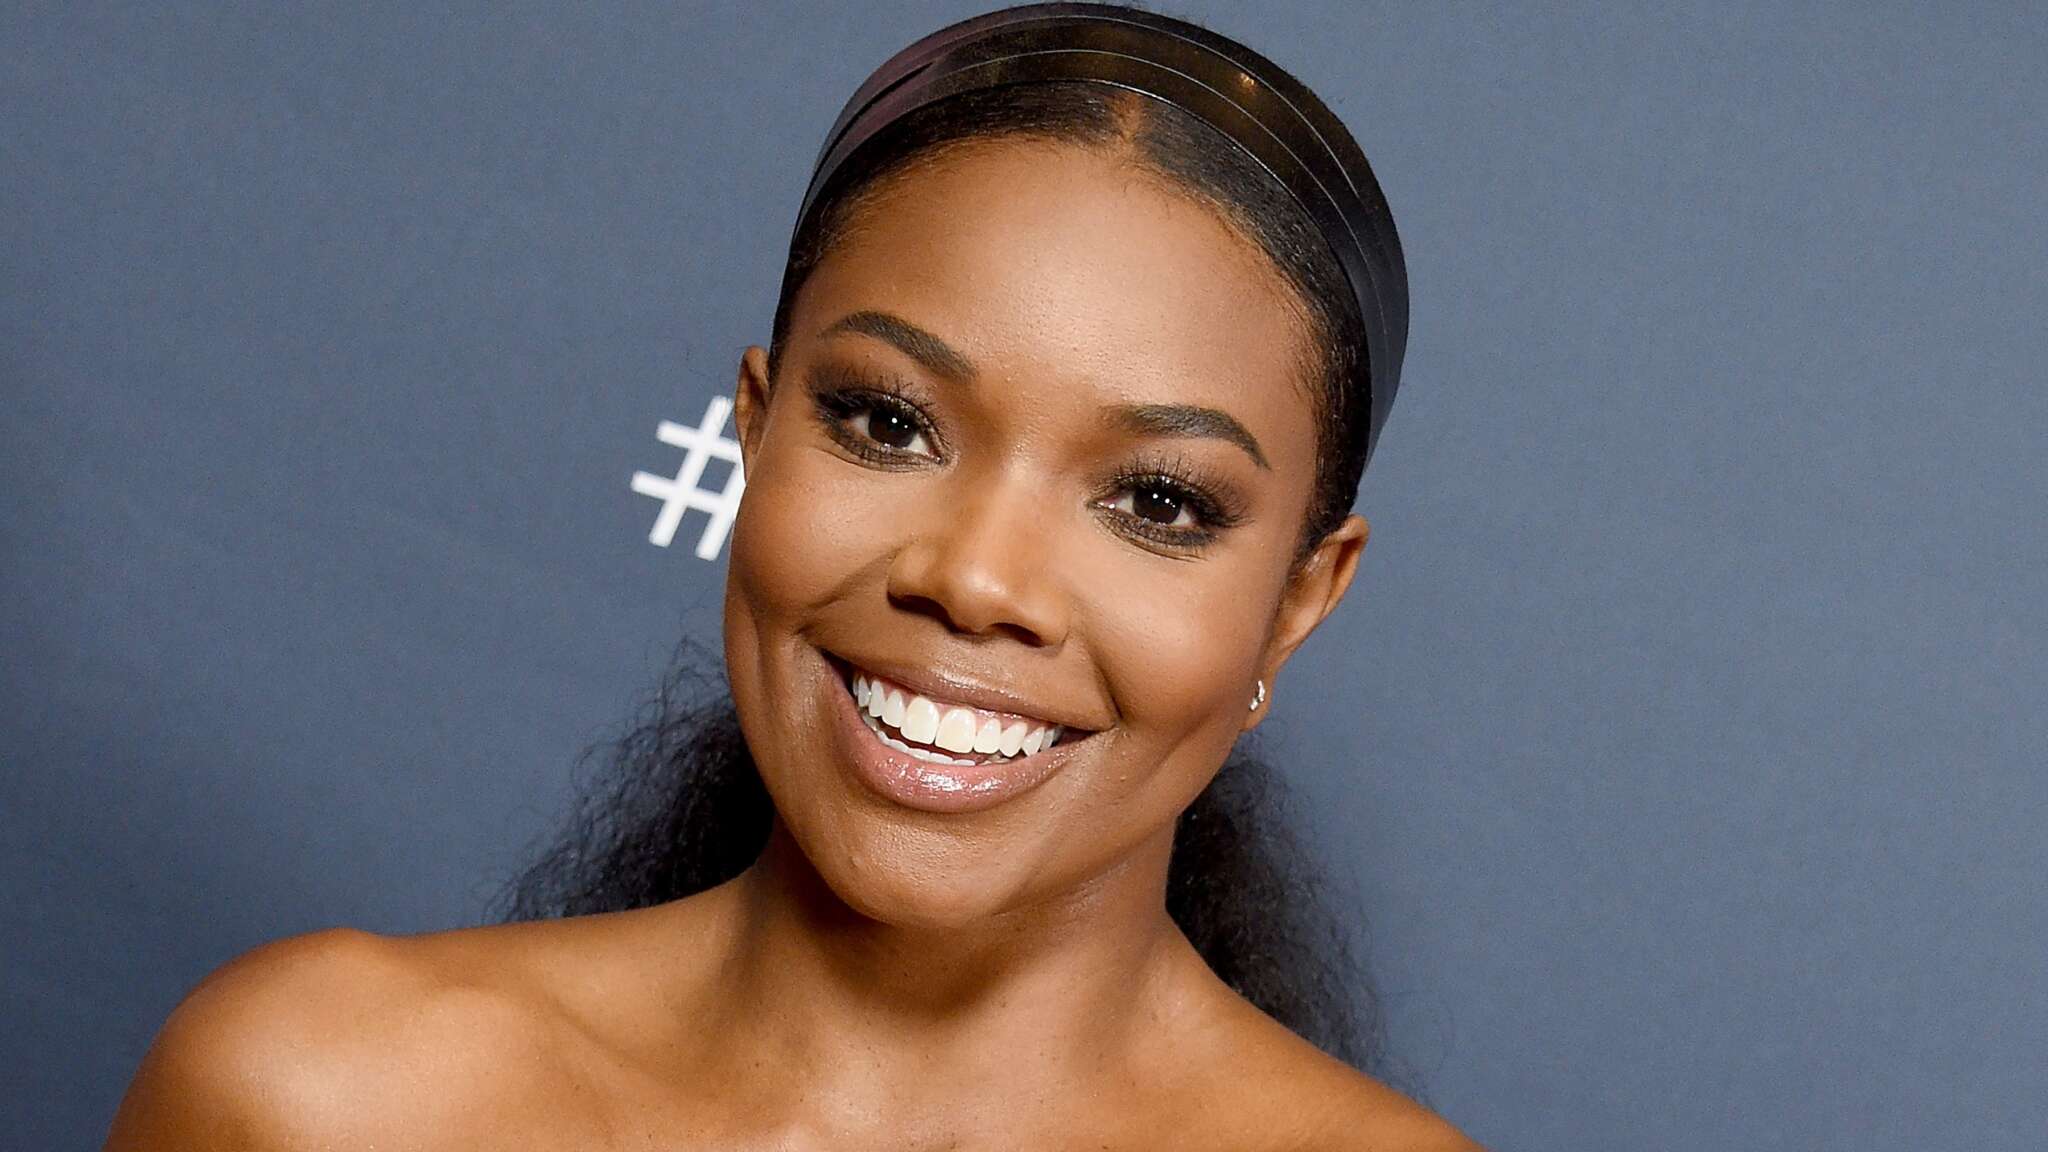 Gabrielle Union Shares A New Photo Shoot That Leaves Fans In Awe